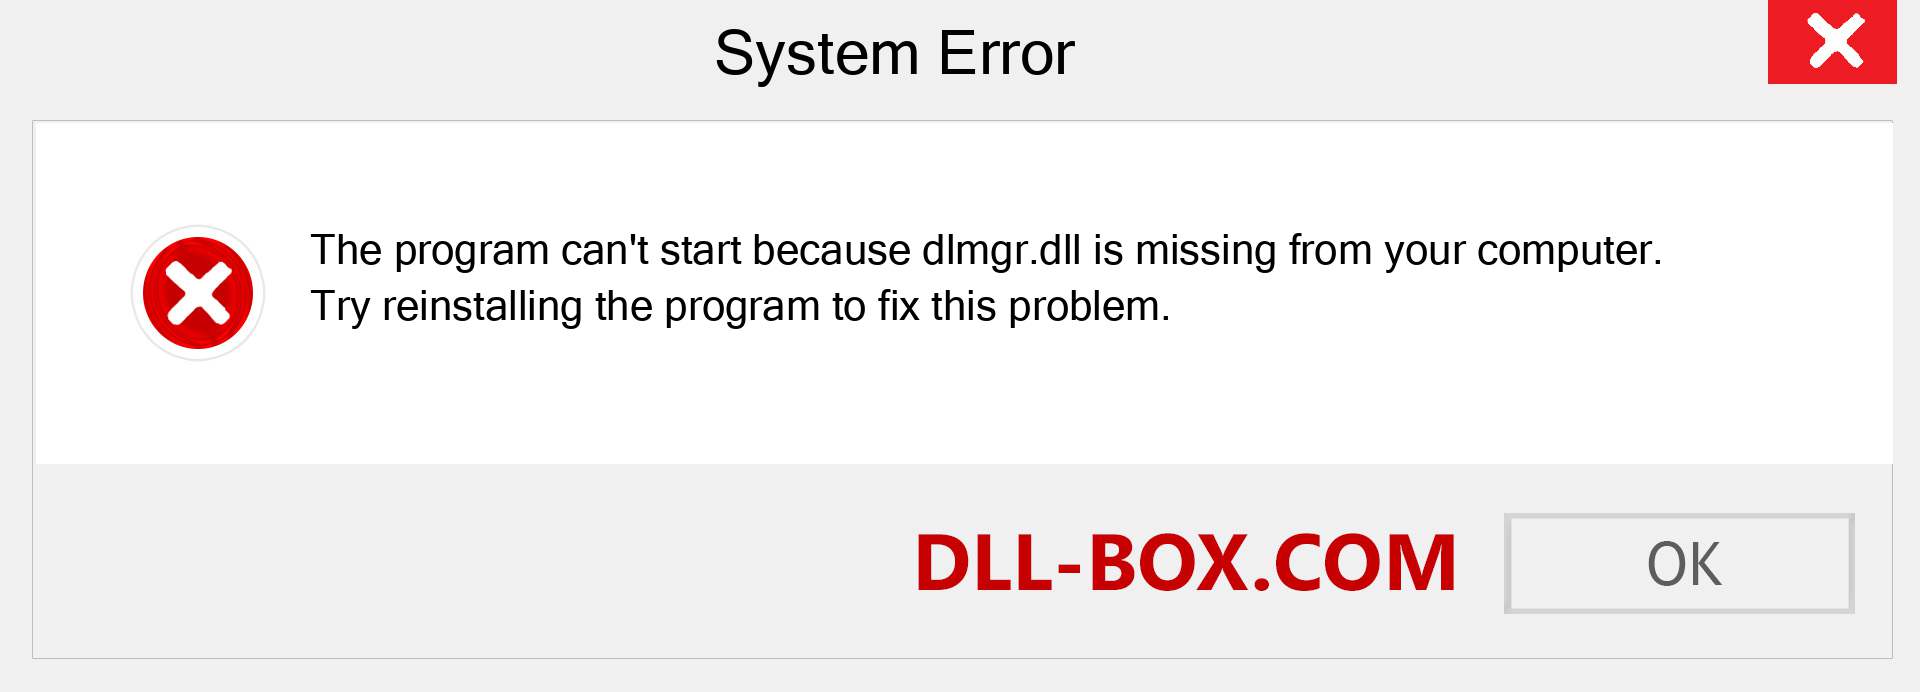  dlmgr.dll file is missing?. Download for Windows 7, 8, 10 - Fix  dlmgr dll Missing Error on Windows, photos, images